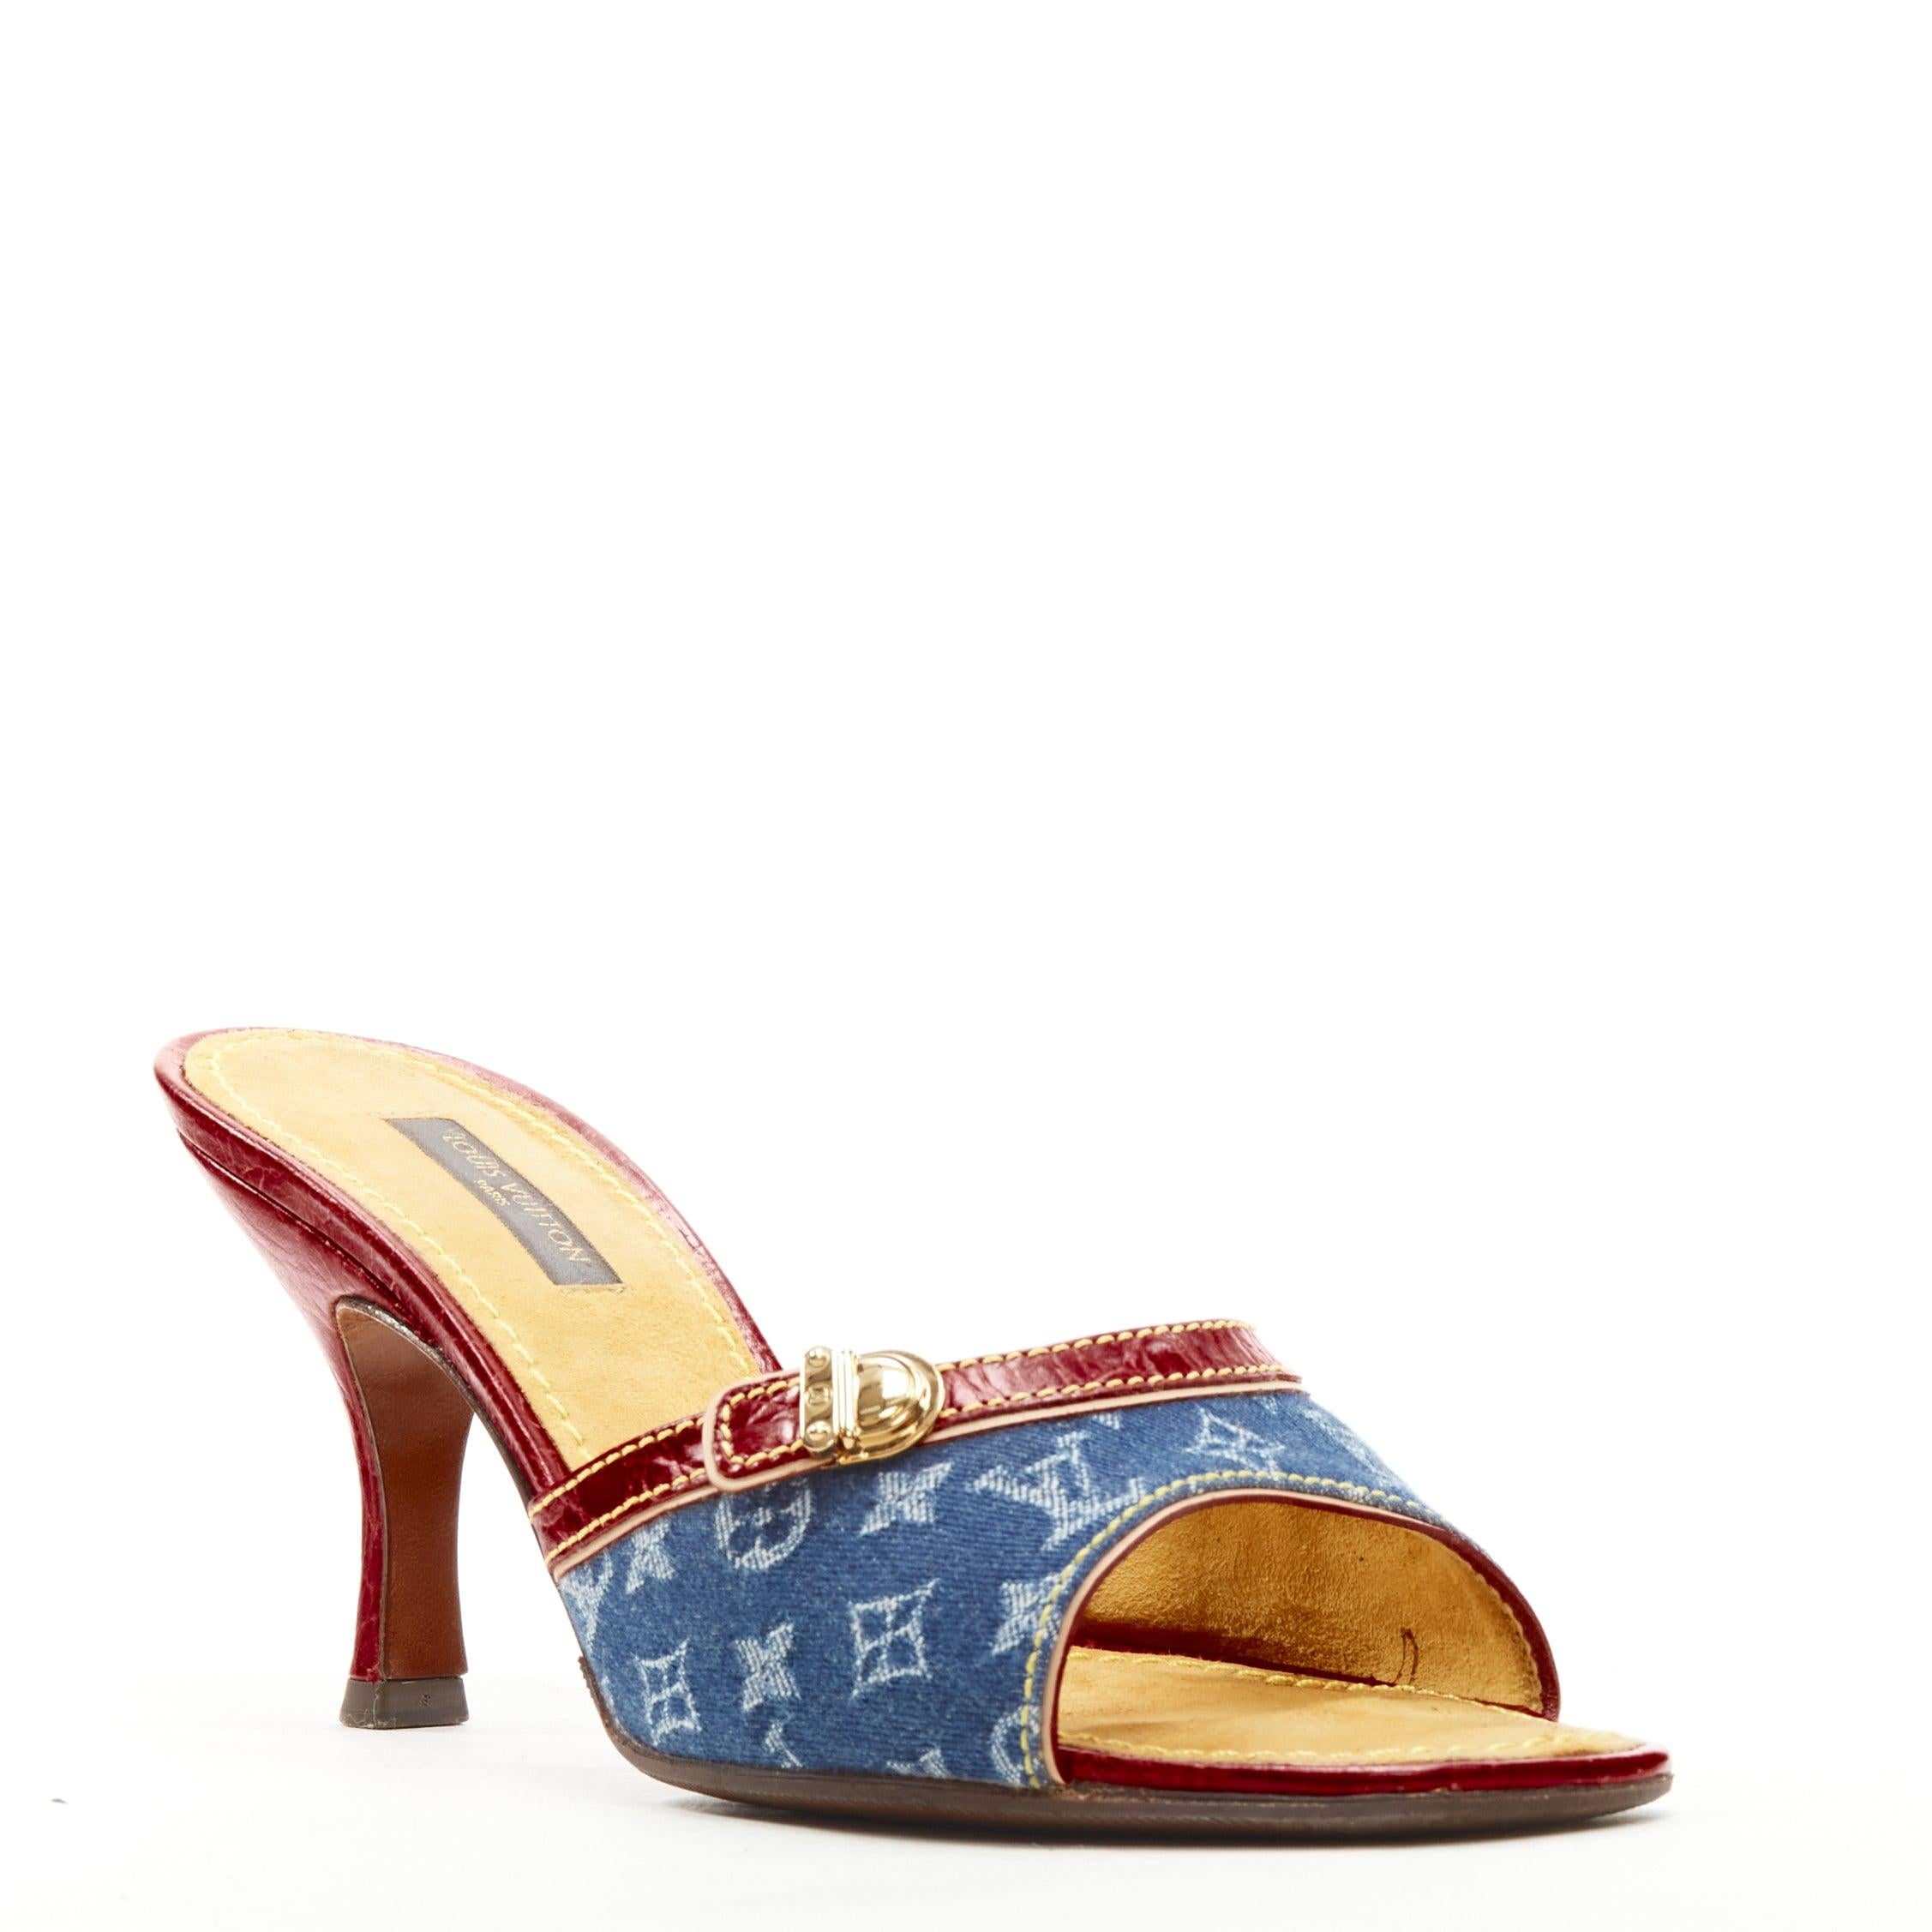 LOUIS VUITTON Y2K blue denim buckle leather high heel mule sandal EU37
Reference: ANWU/A00973
Brand: Louis Vuitton
Designer: Marc Jacobs
Material: Denim, Leather
Color: Blue, Red
Pattern: Solid
Lining: Suede
Extra Details: Gold-tone buckle detail.